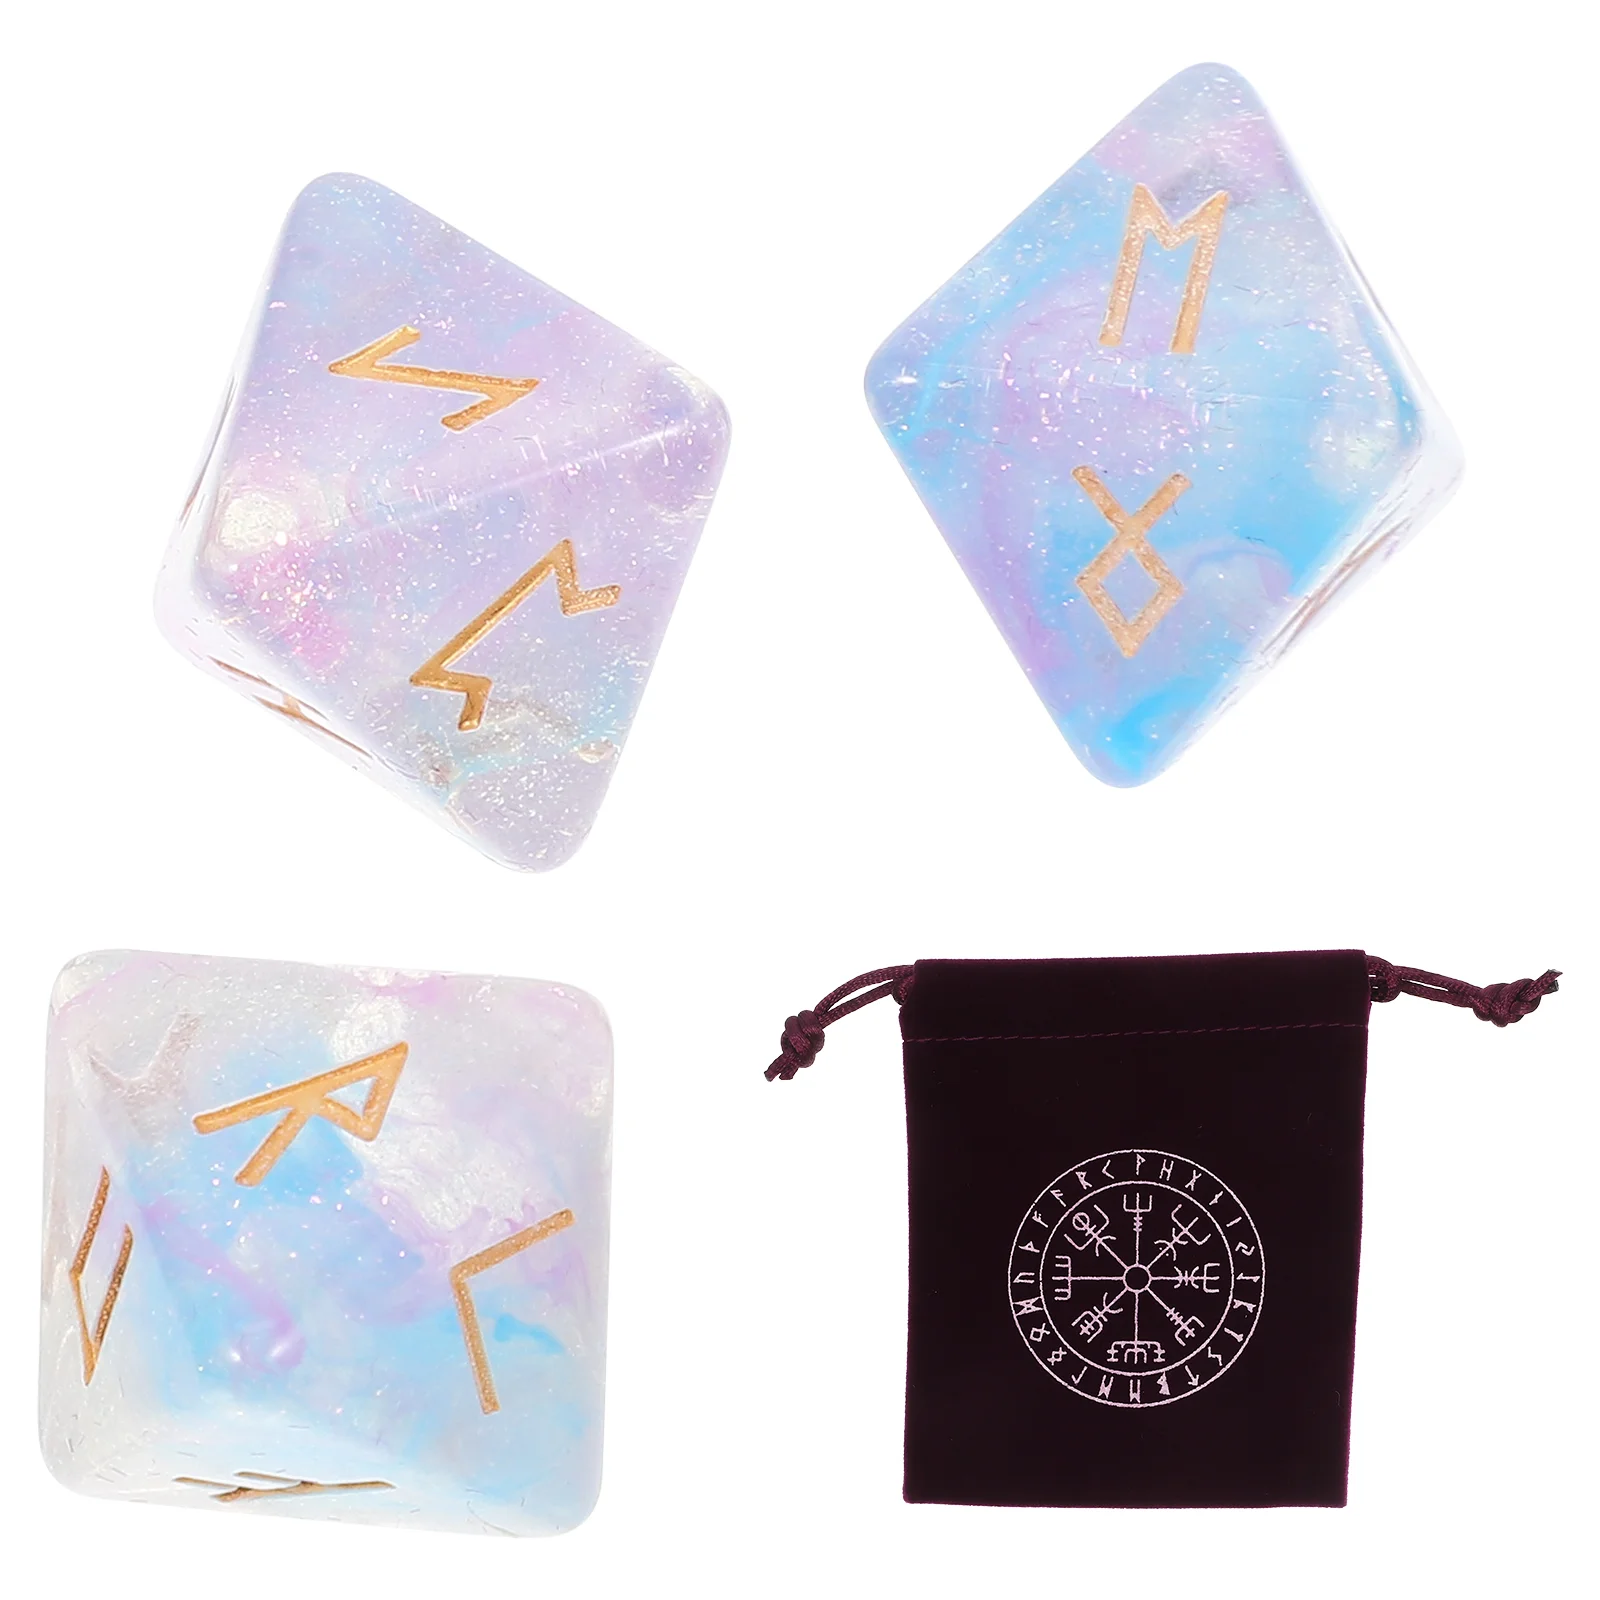 

Rune Dice Tabletop Decor Multi-sided Dices Cloth Bag Constellation Party Favor Storage Resin Game Prop Portable Set